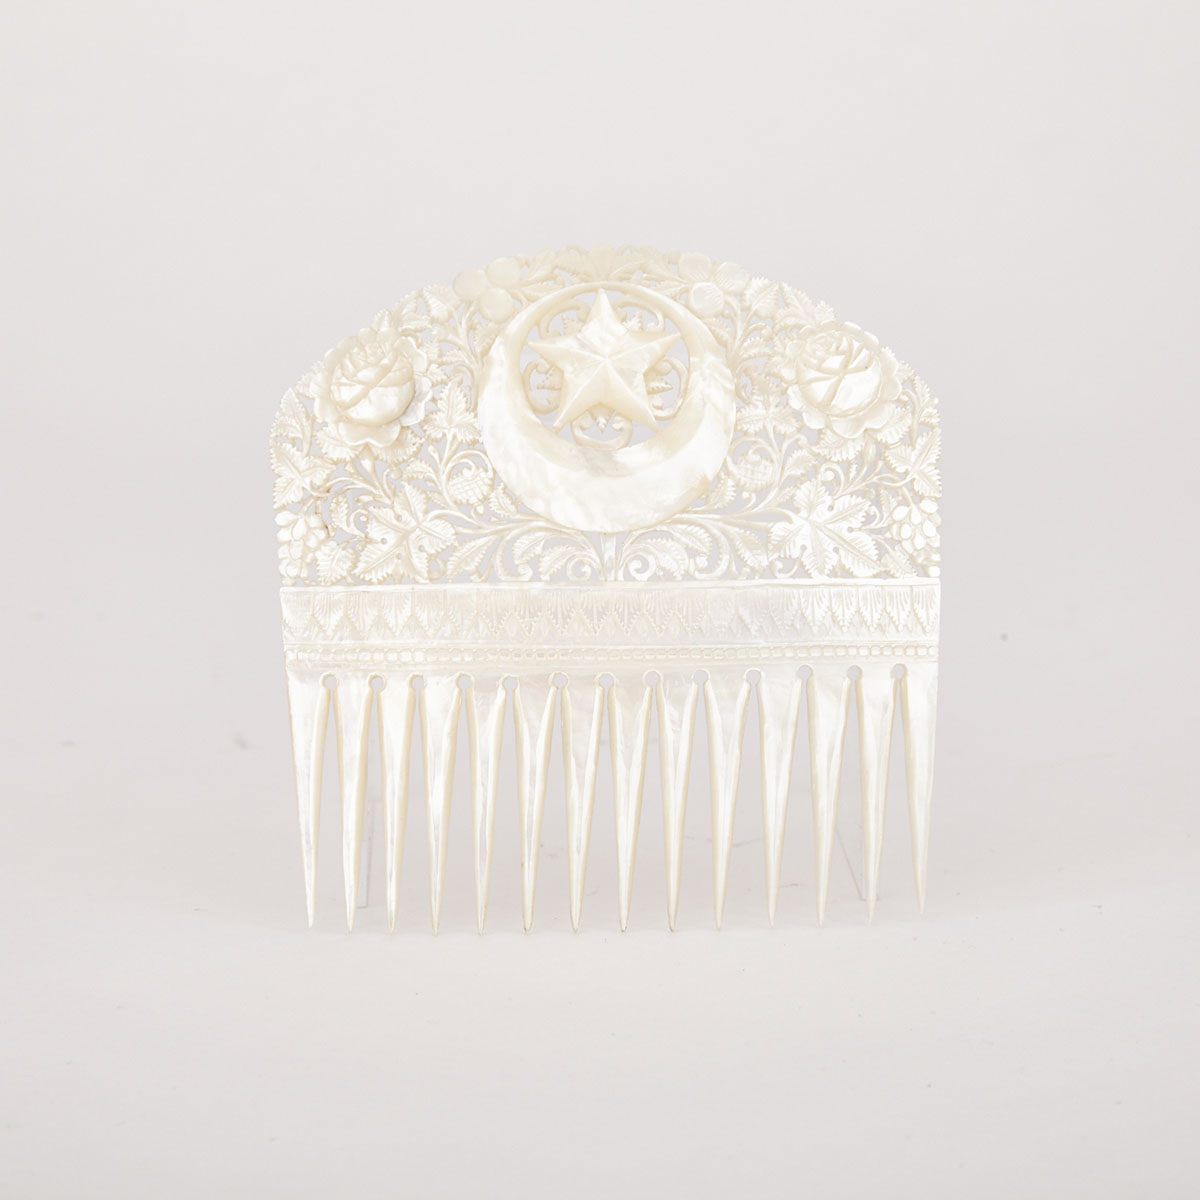 Turkish Ottoman Pierce Carved Mother of Pearl Comb, c.1900